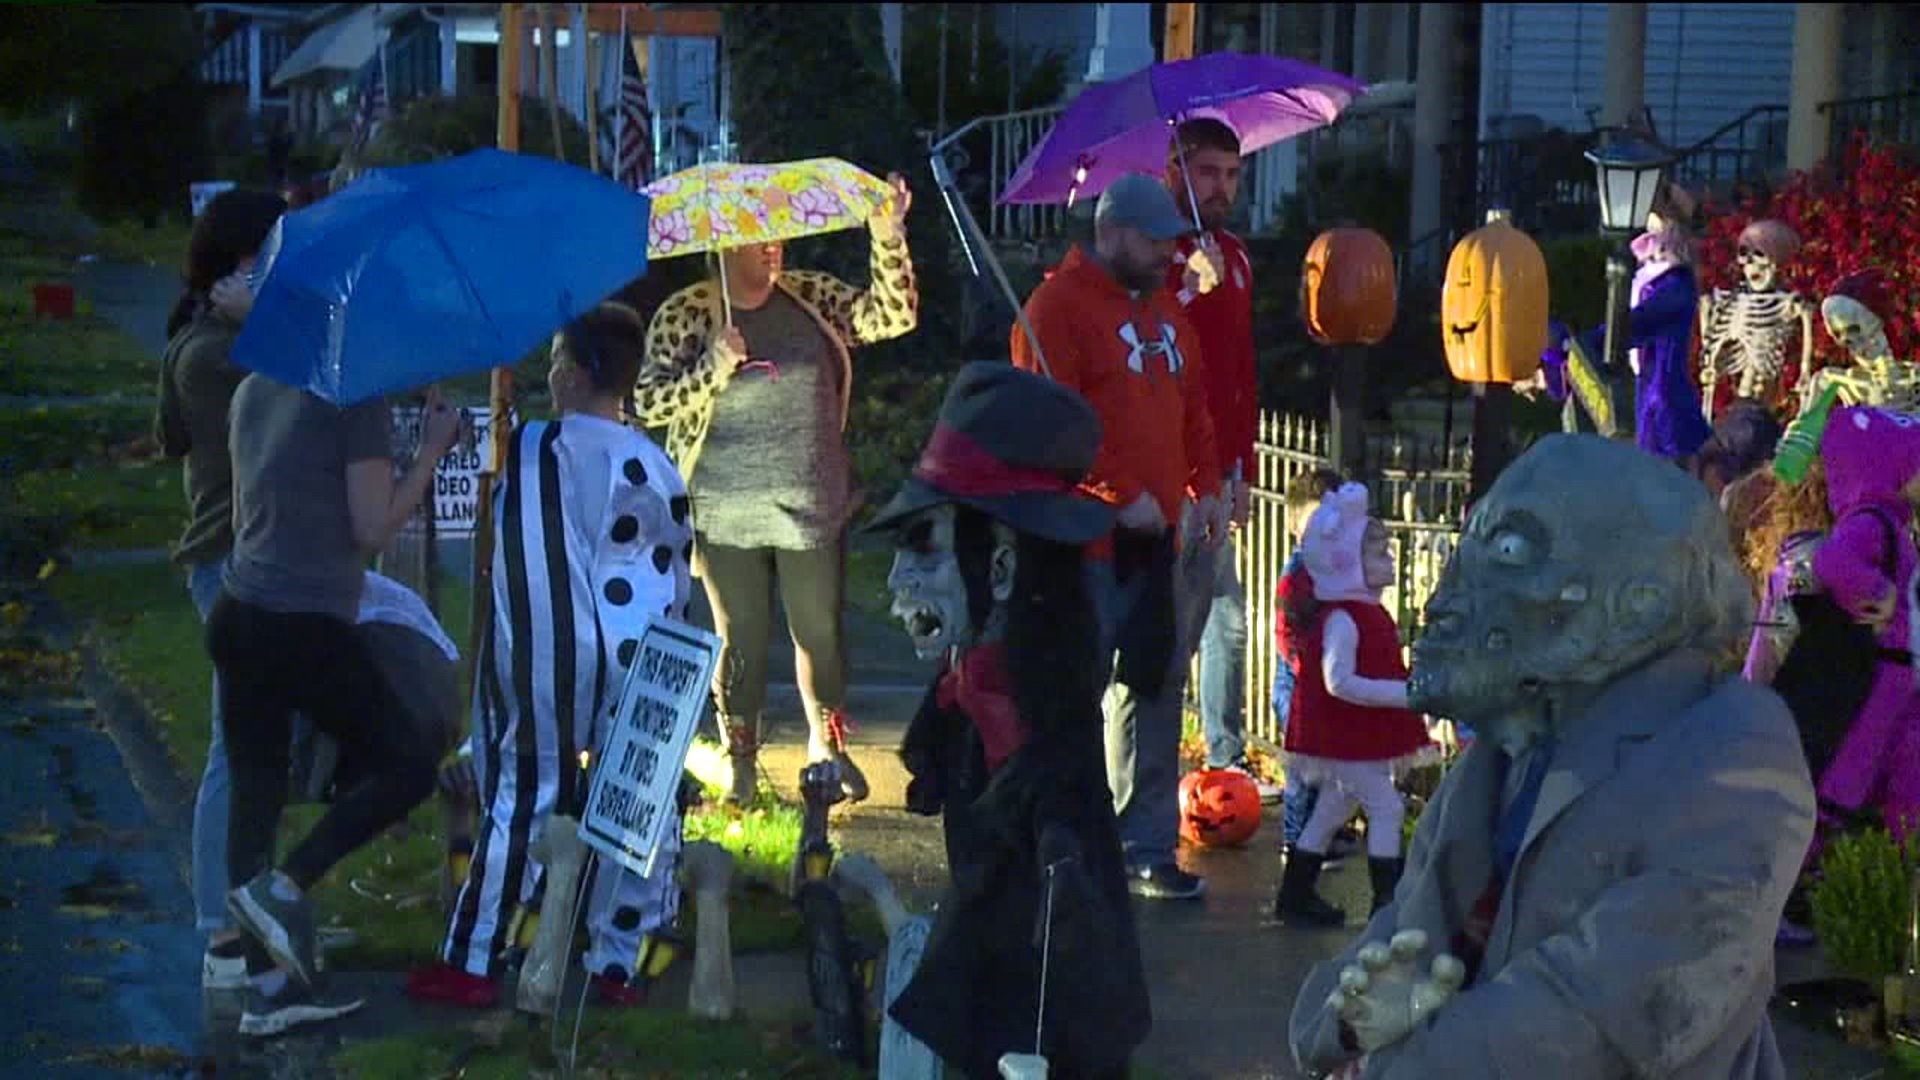 Soggy Night for Trick-or-Treaters